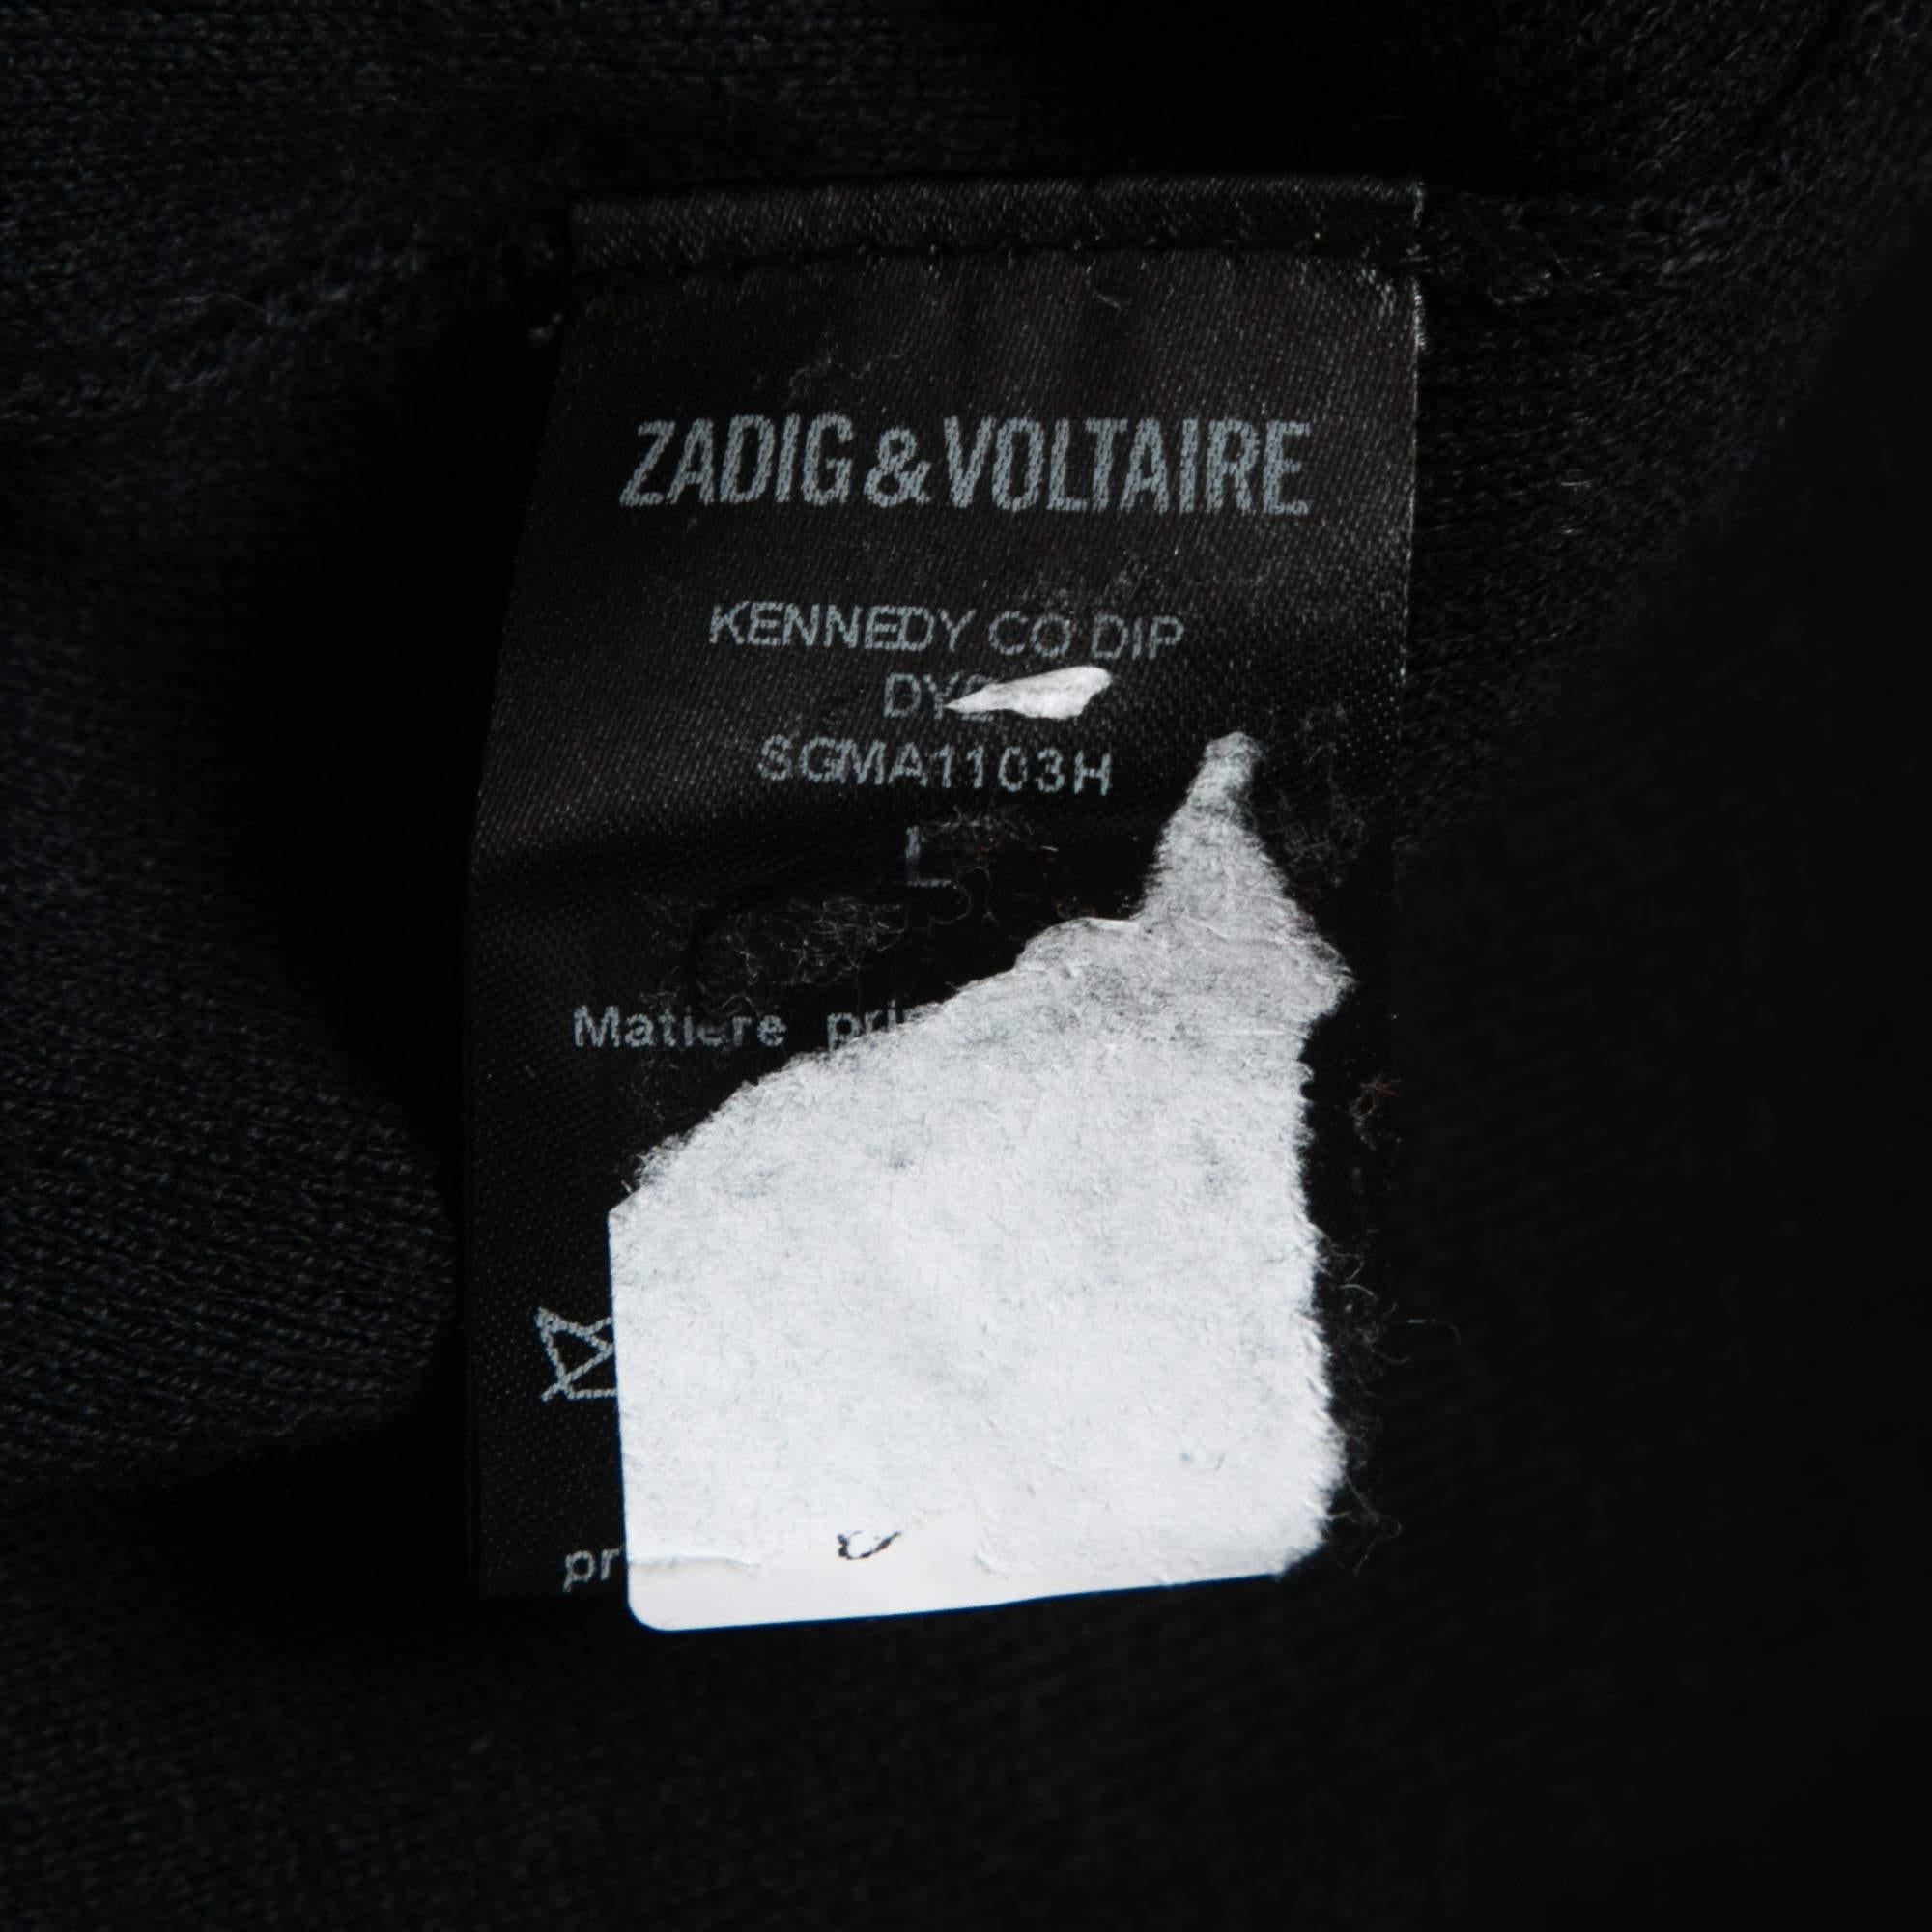 Zadig & Voltaire Pink/Blue Ombre Knit Kennedy Sweater L 4